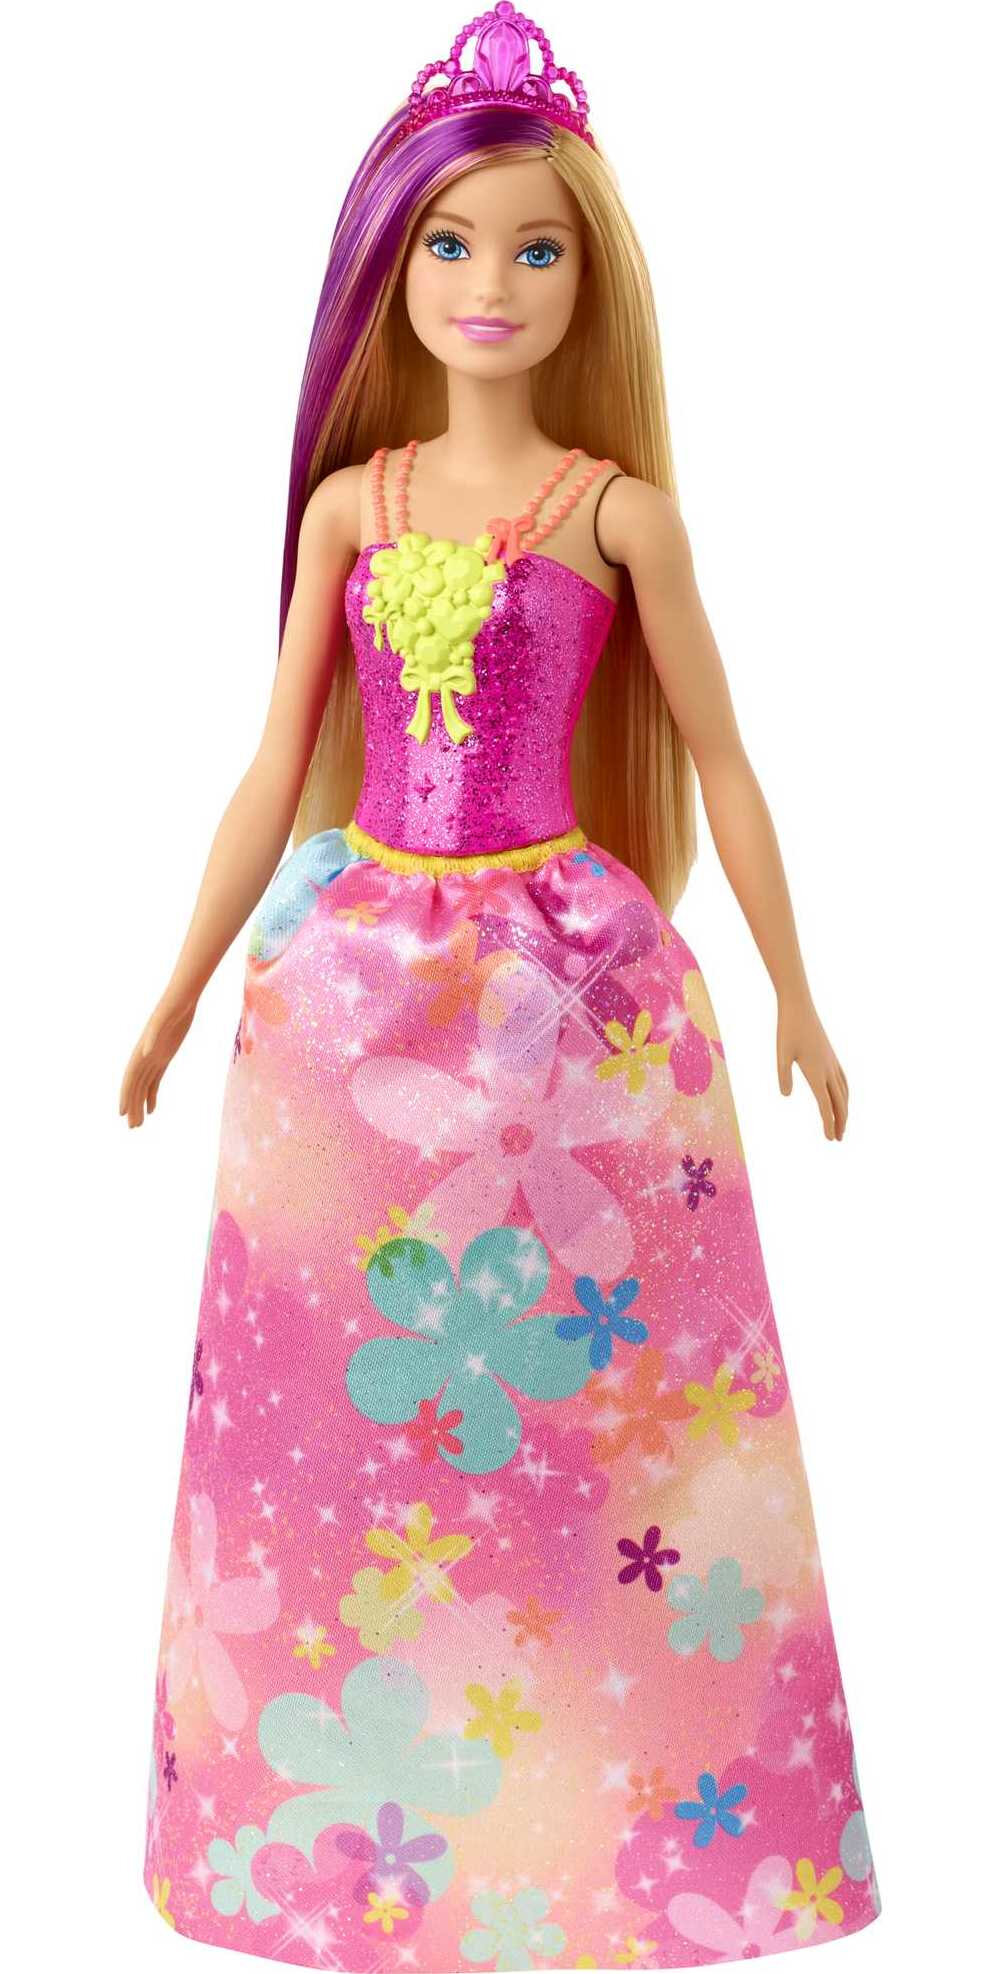 Barbie Dreamtopia Royal Doll with Blonde Hair with Purple Streak & Accessories - image 1 of 6